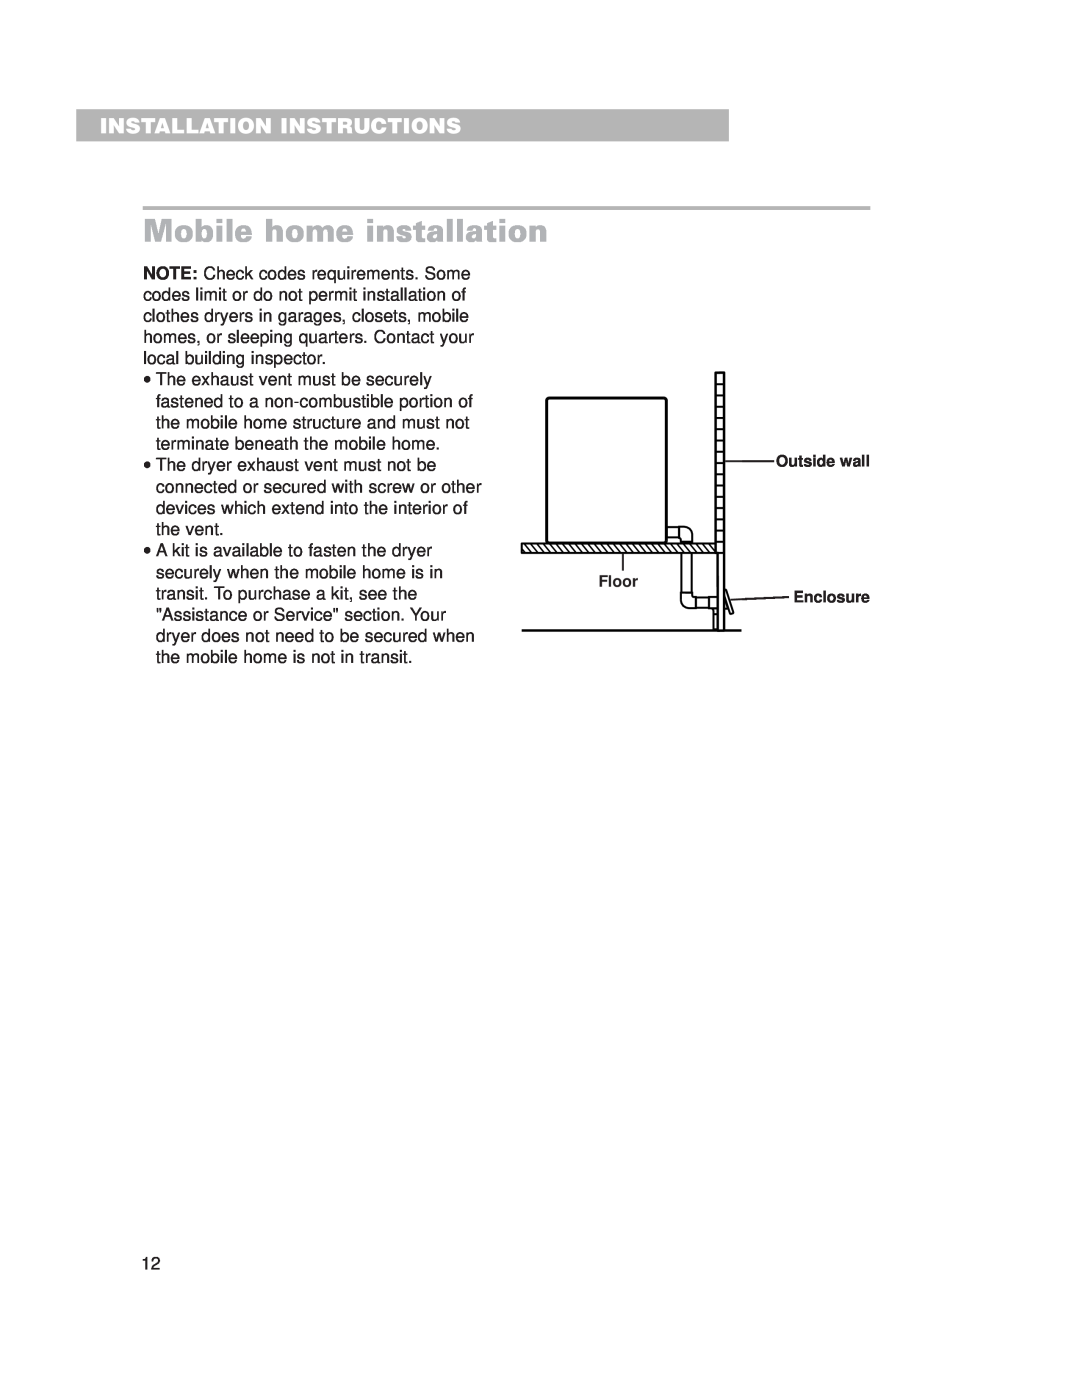 Whirlpool 3977631 Mobile home installation, Installation Instructions, Floor, Outside wall Enclosure 